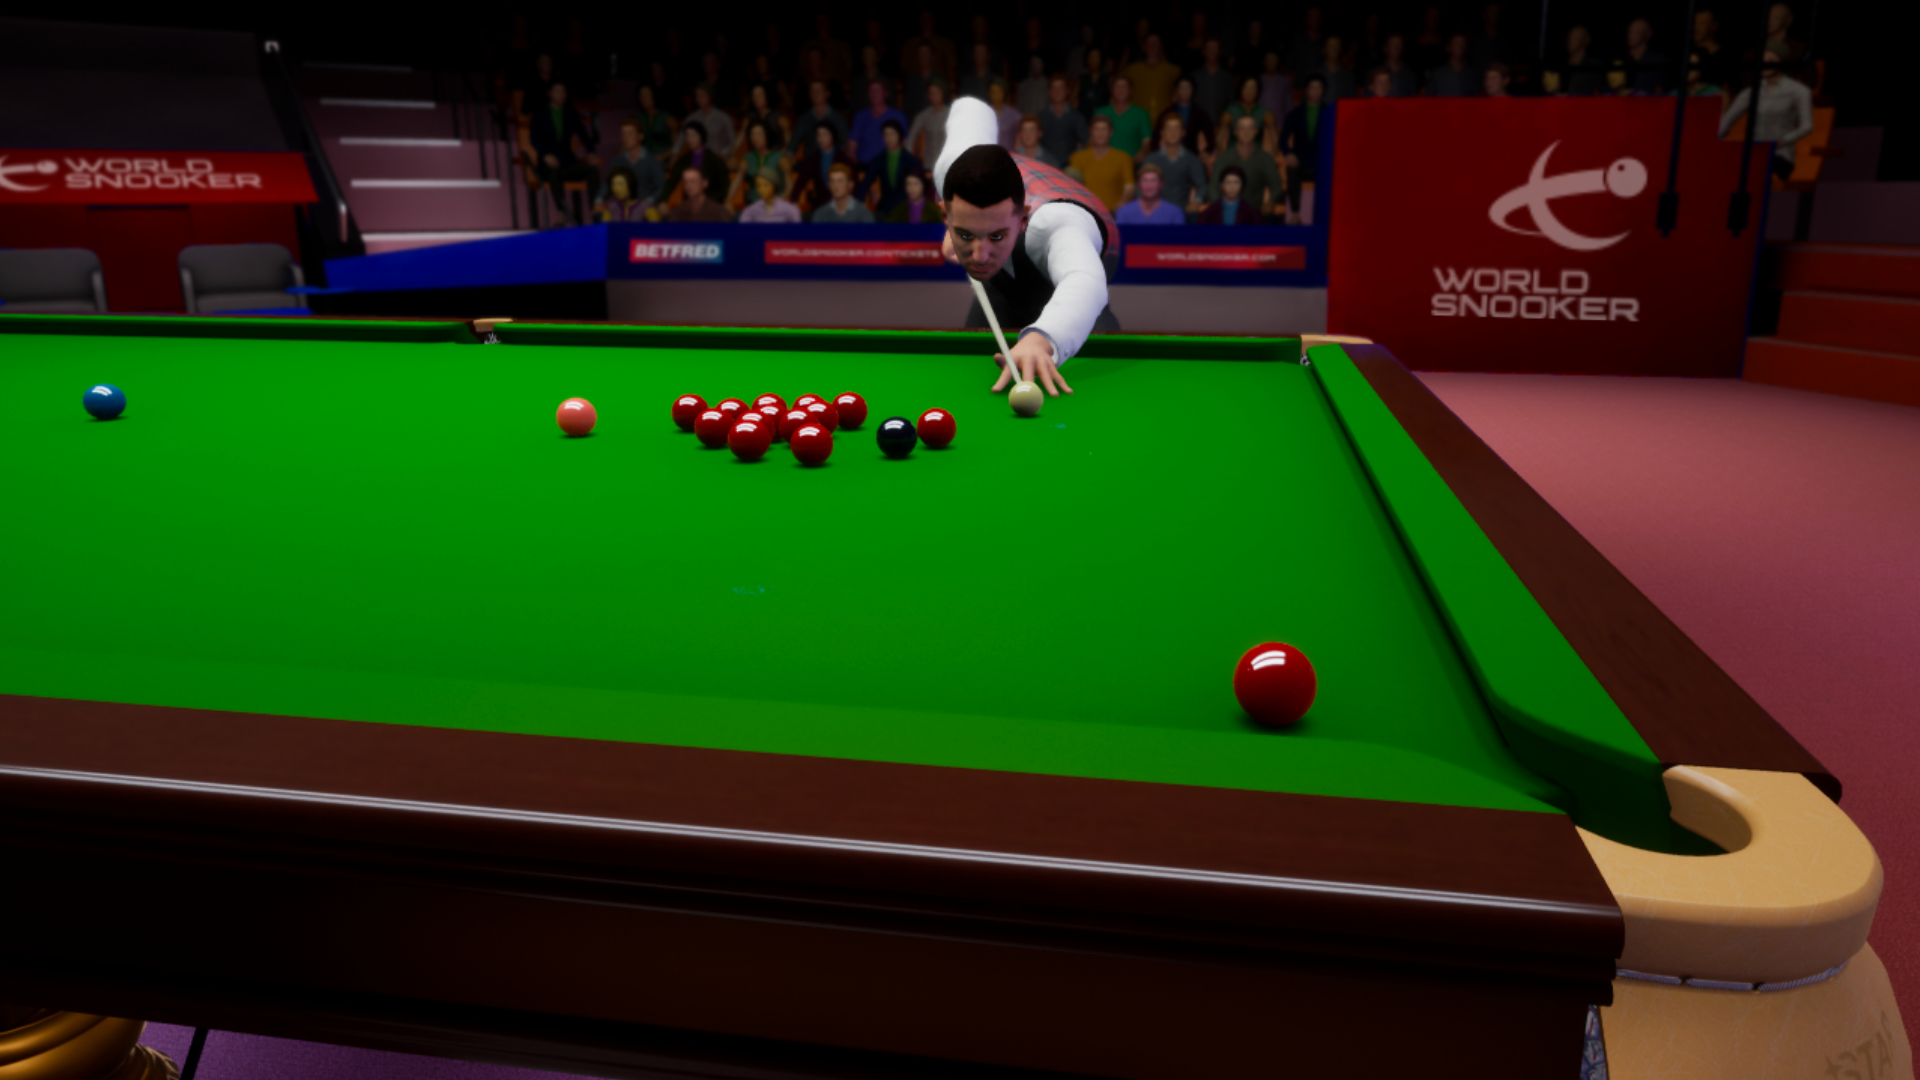 Snooker 19 Coming To All Platforms In 2019